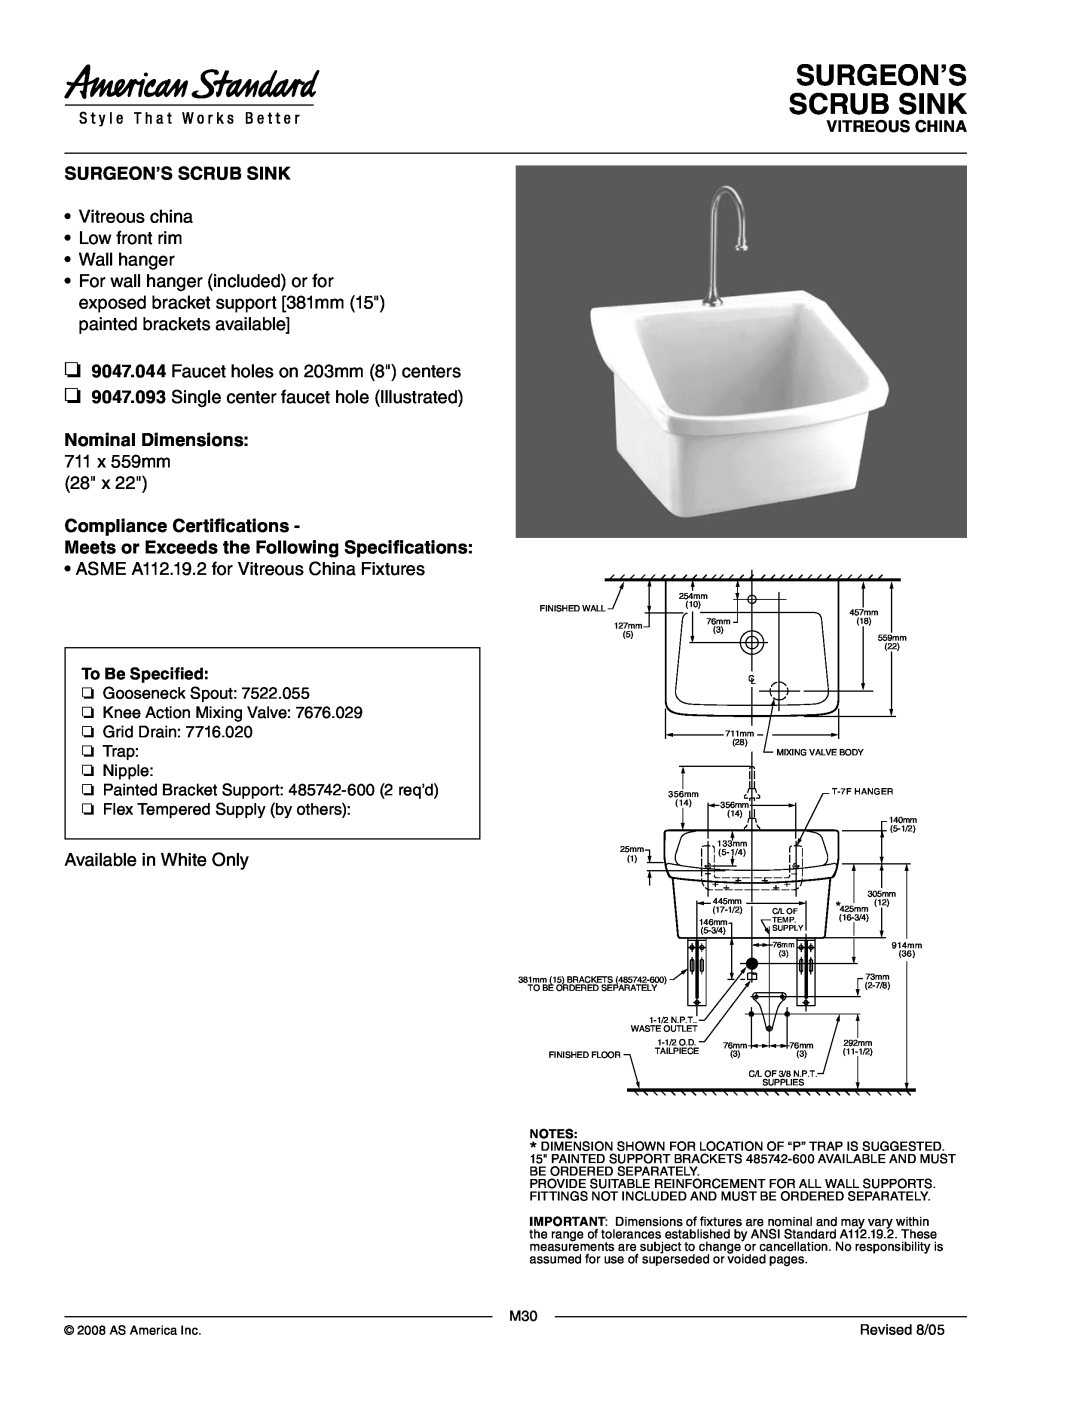 American Standard 7522.055 dimensions Surgeon’S Scrub Sink, Vitreous china Low front rim Wall hanger, Vitreous China 